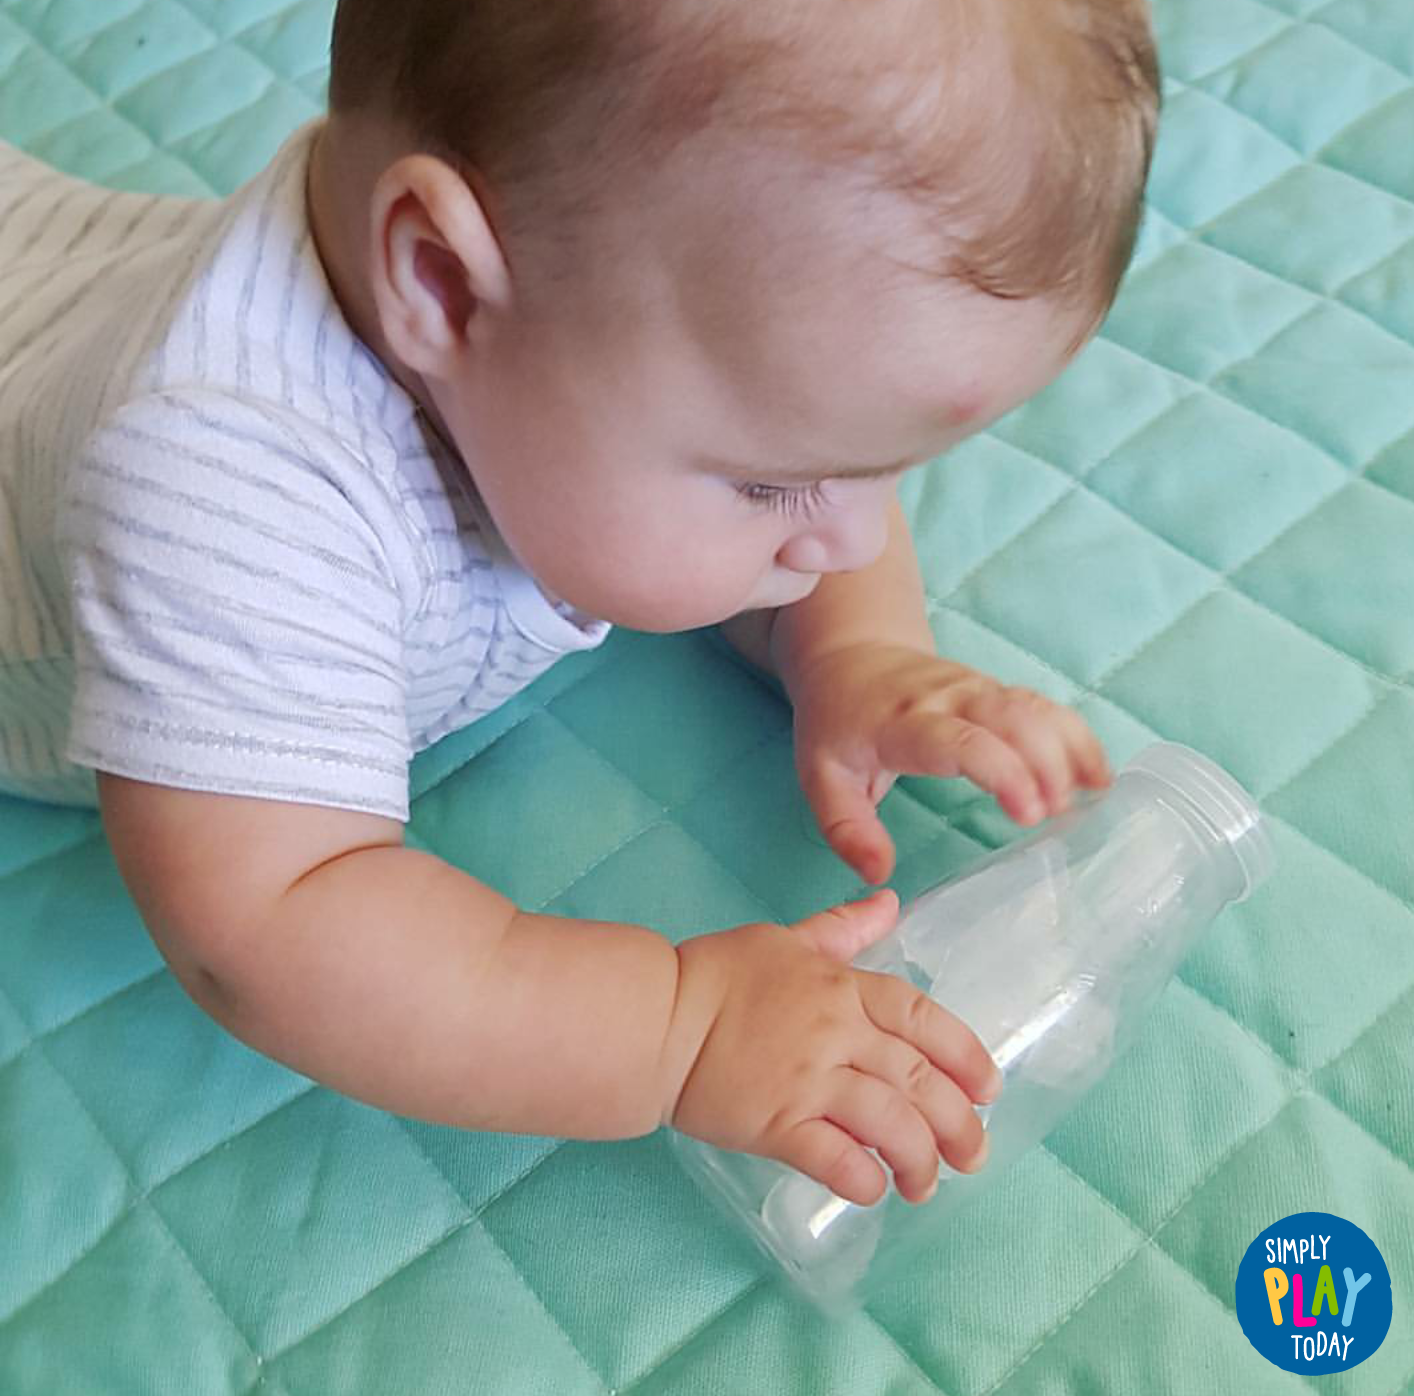 Month 6: Top 10 Sensory Activities for 6 month old baby » Sensory Lifestyle